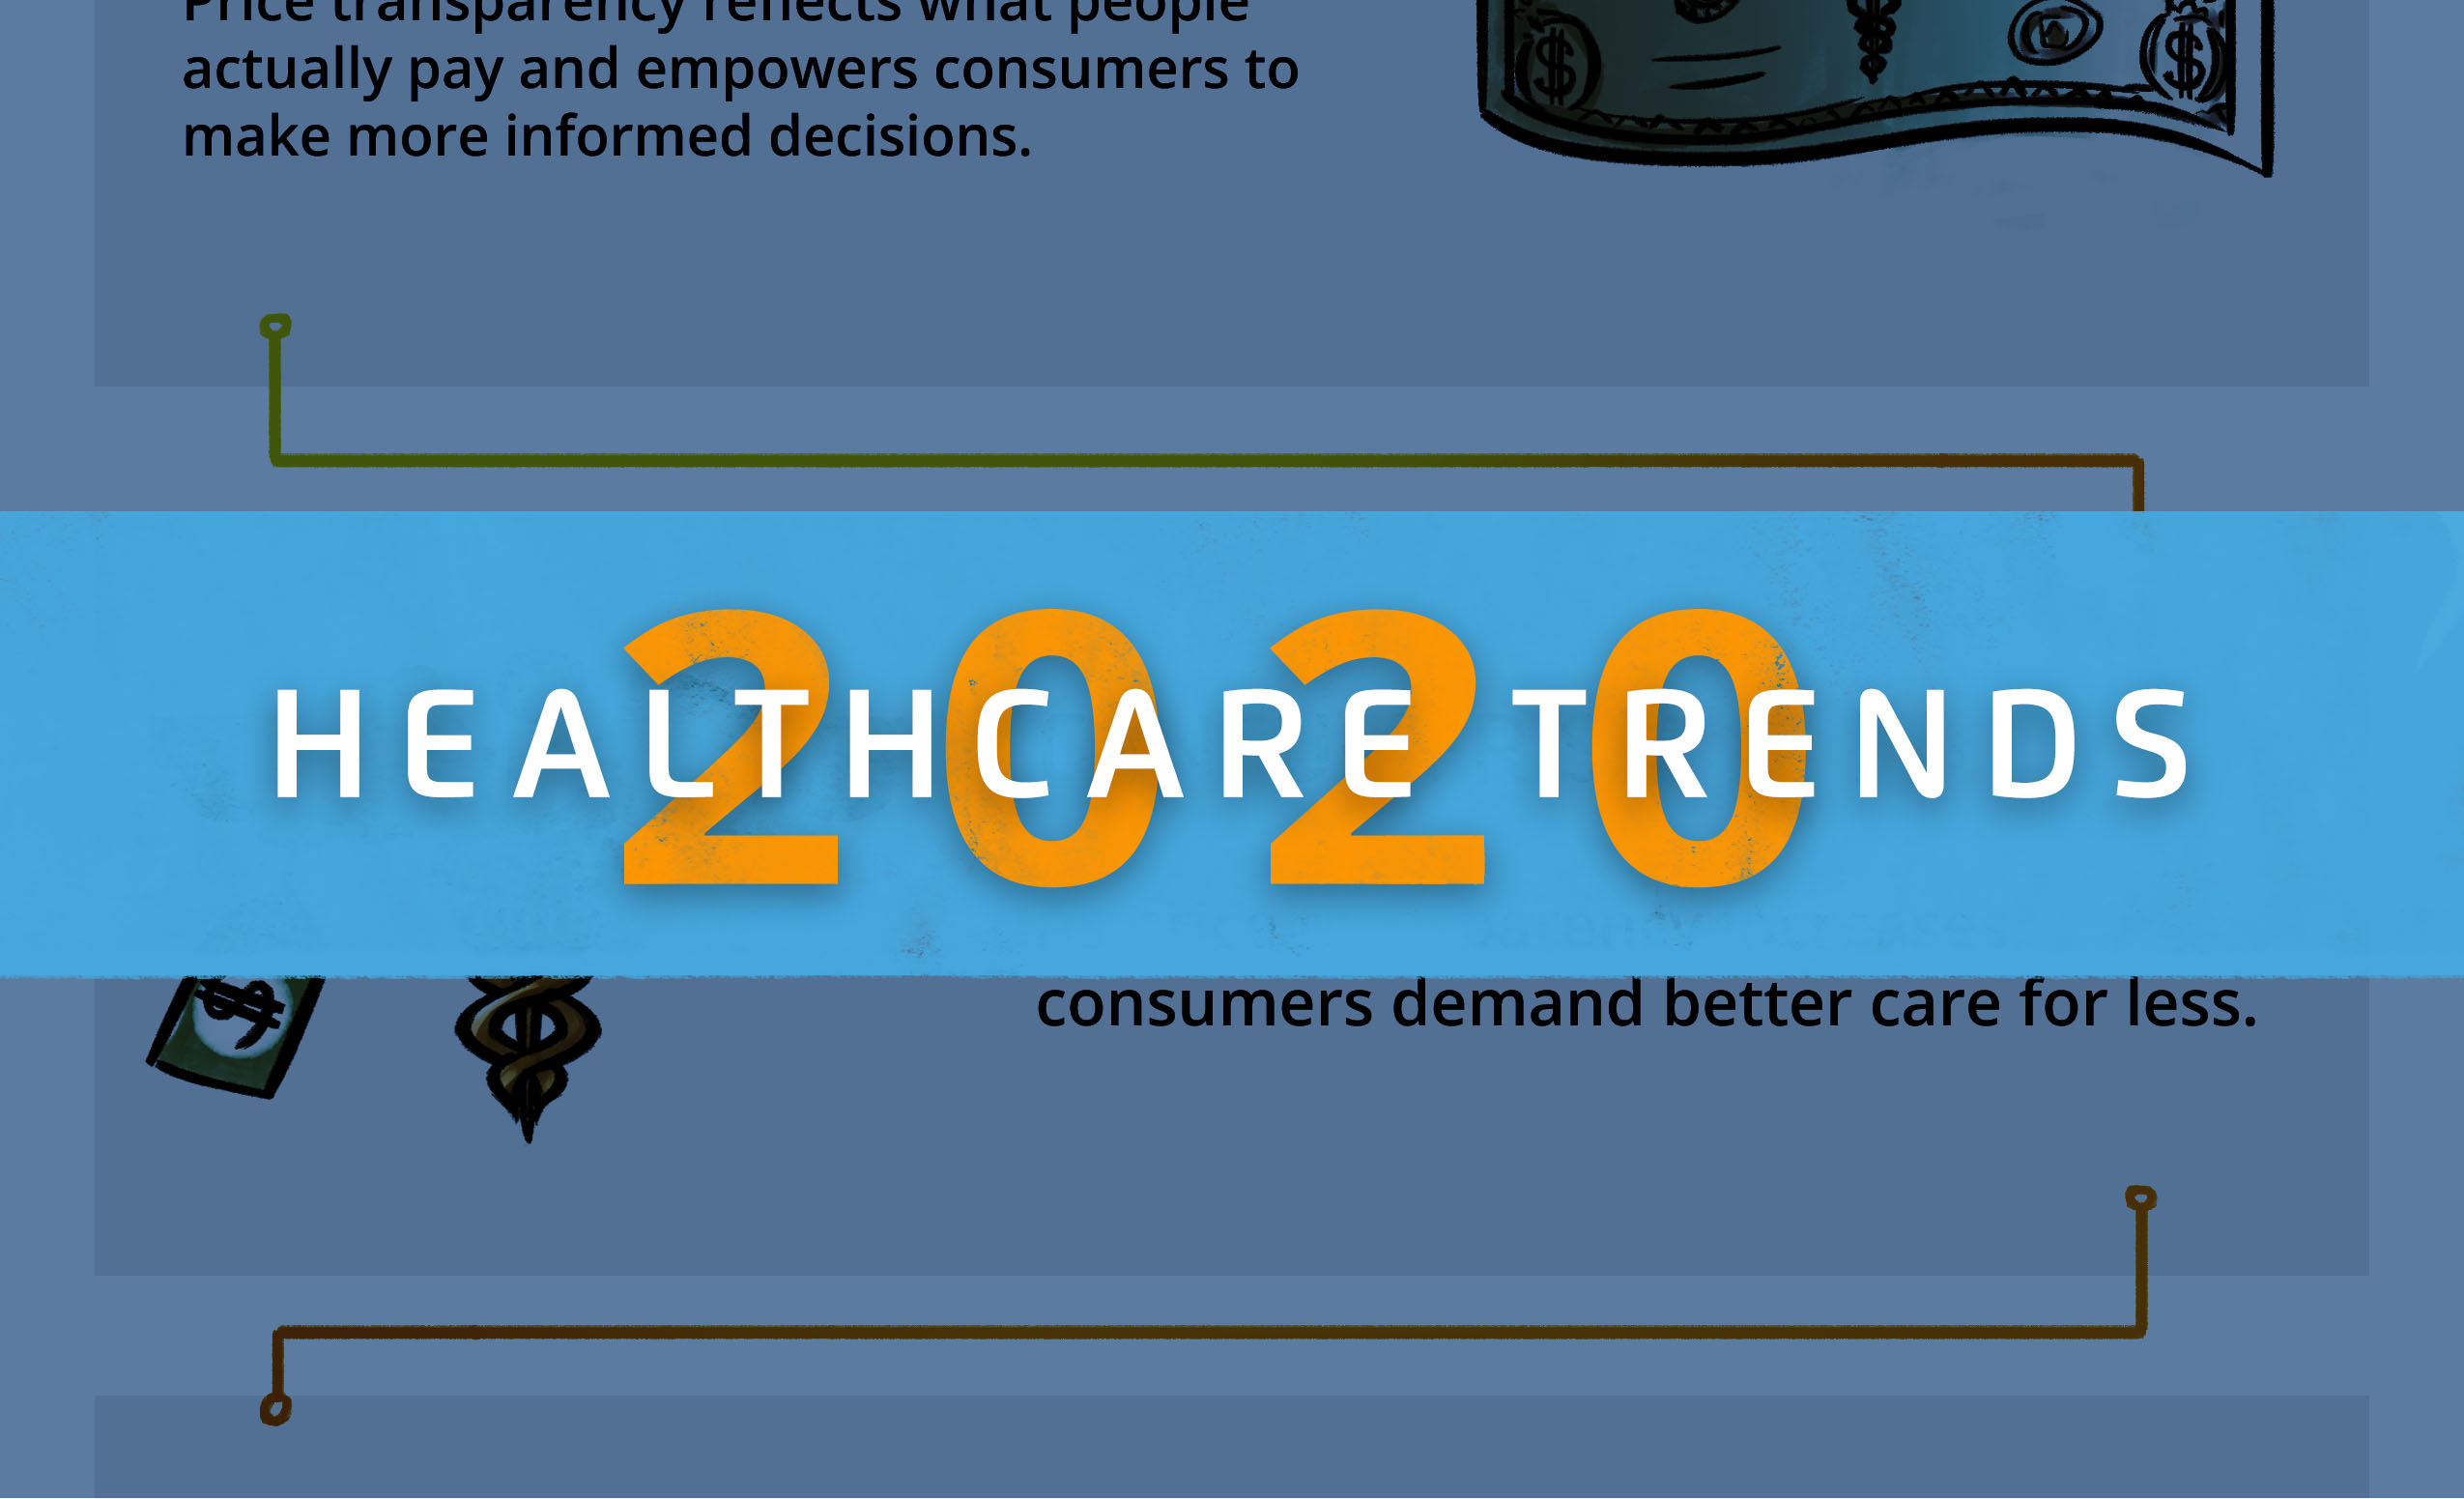 Healthcare trends 2020 infographic cover